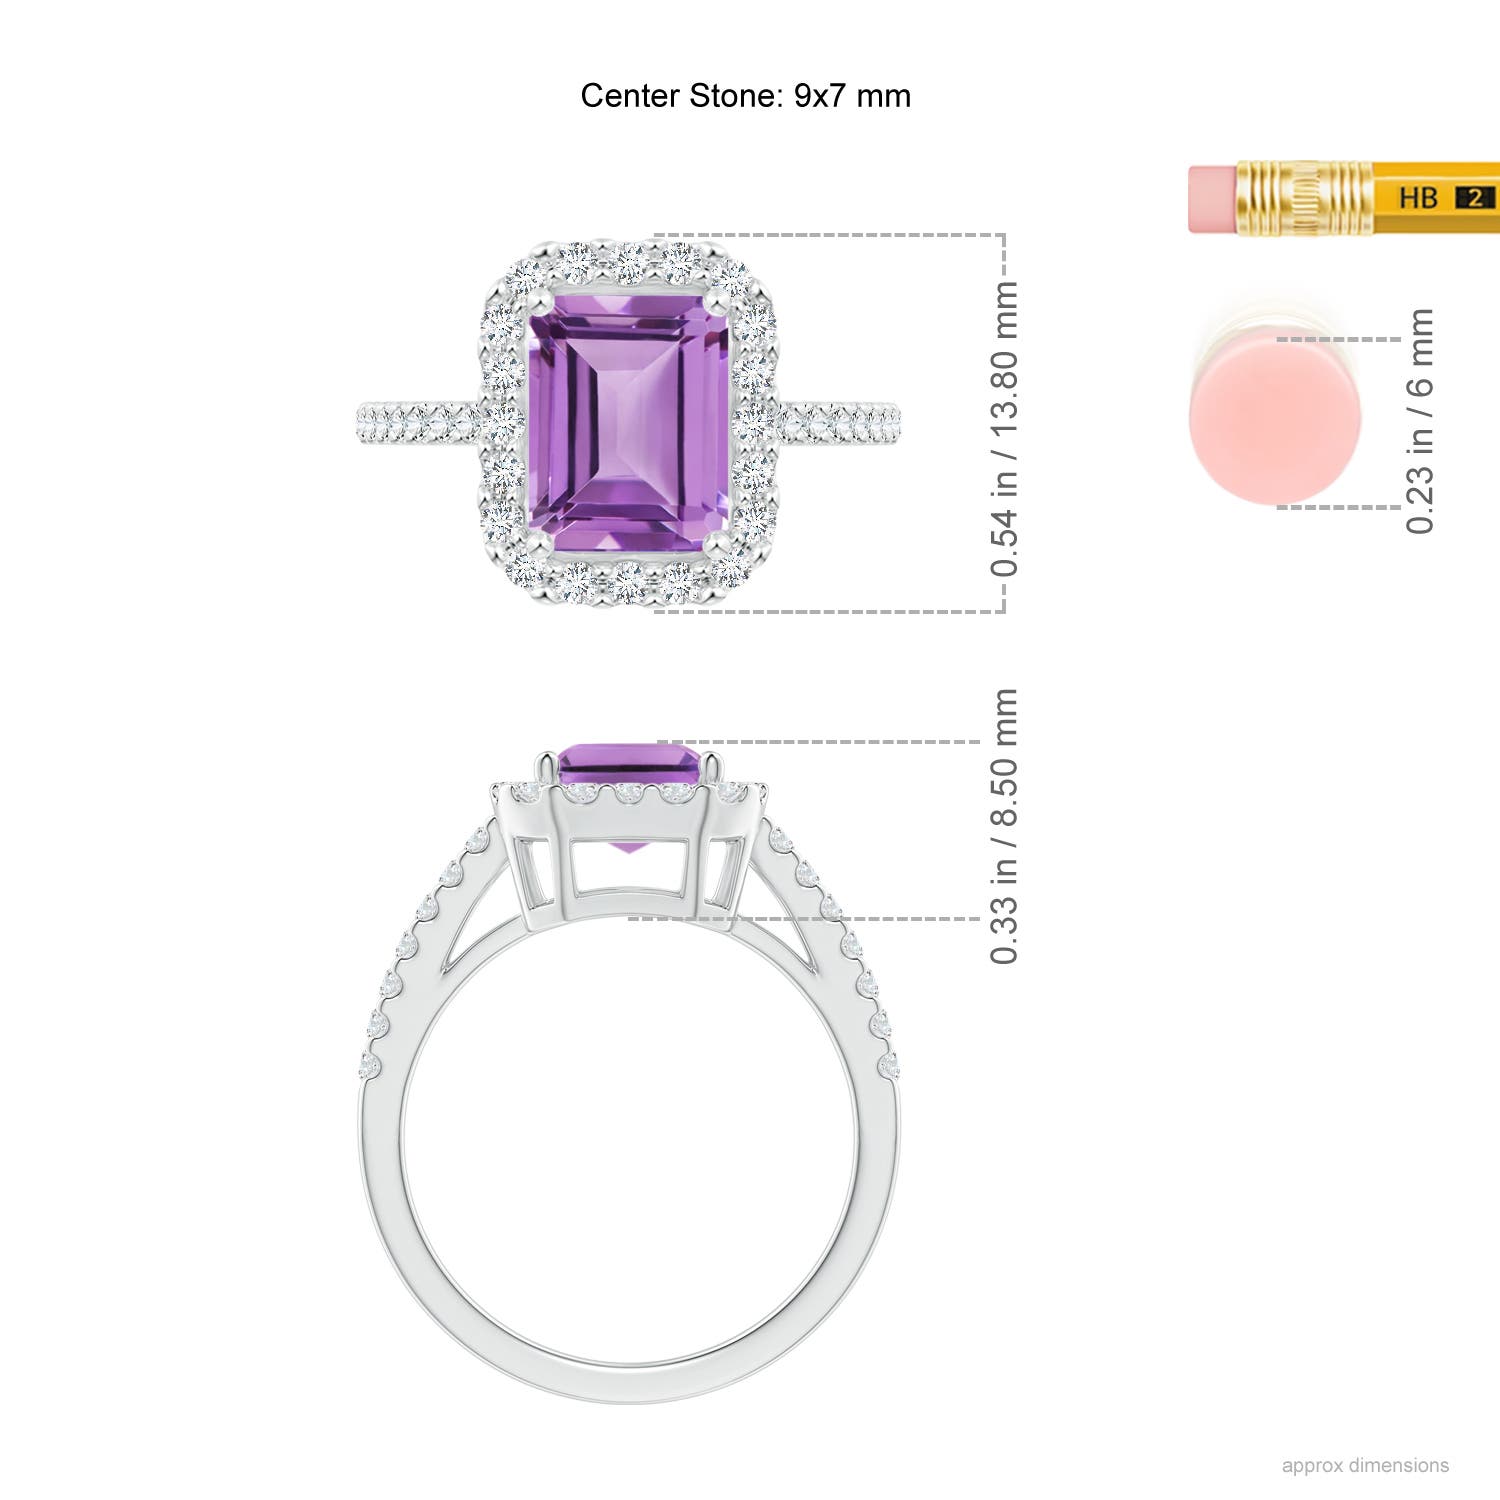 A - Amethyst / 2.68 CT / 14 KT White Gold